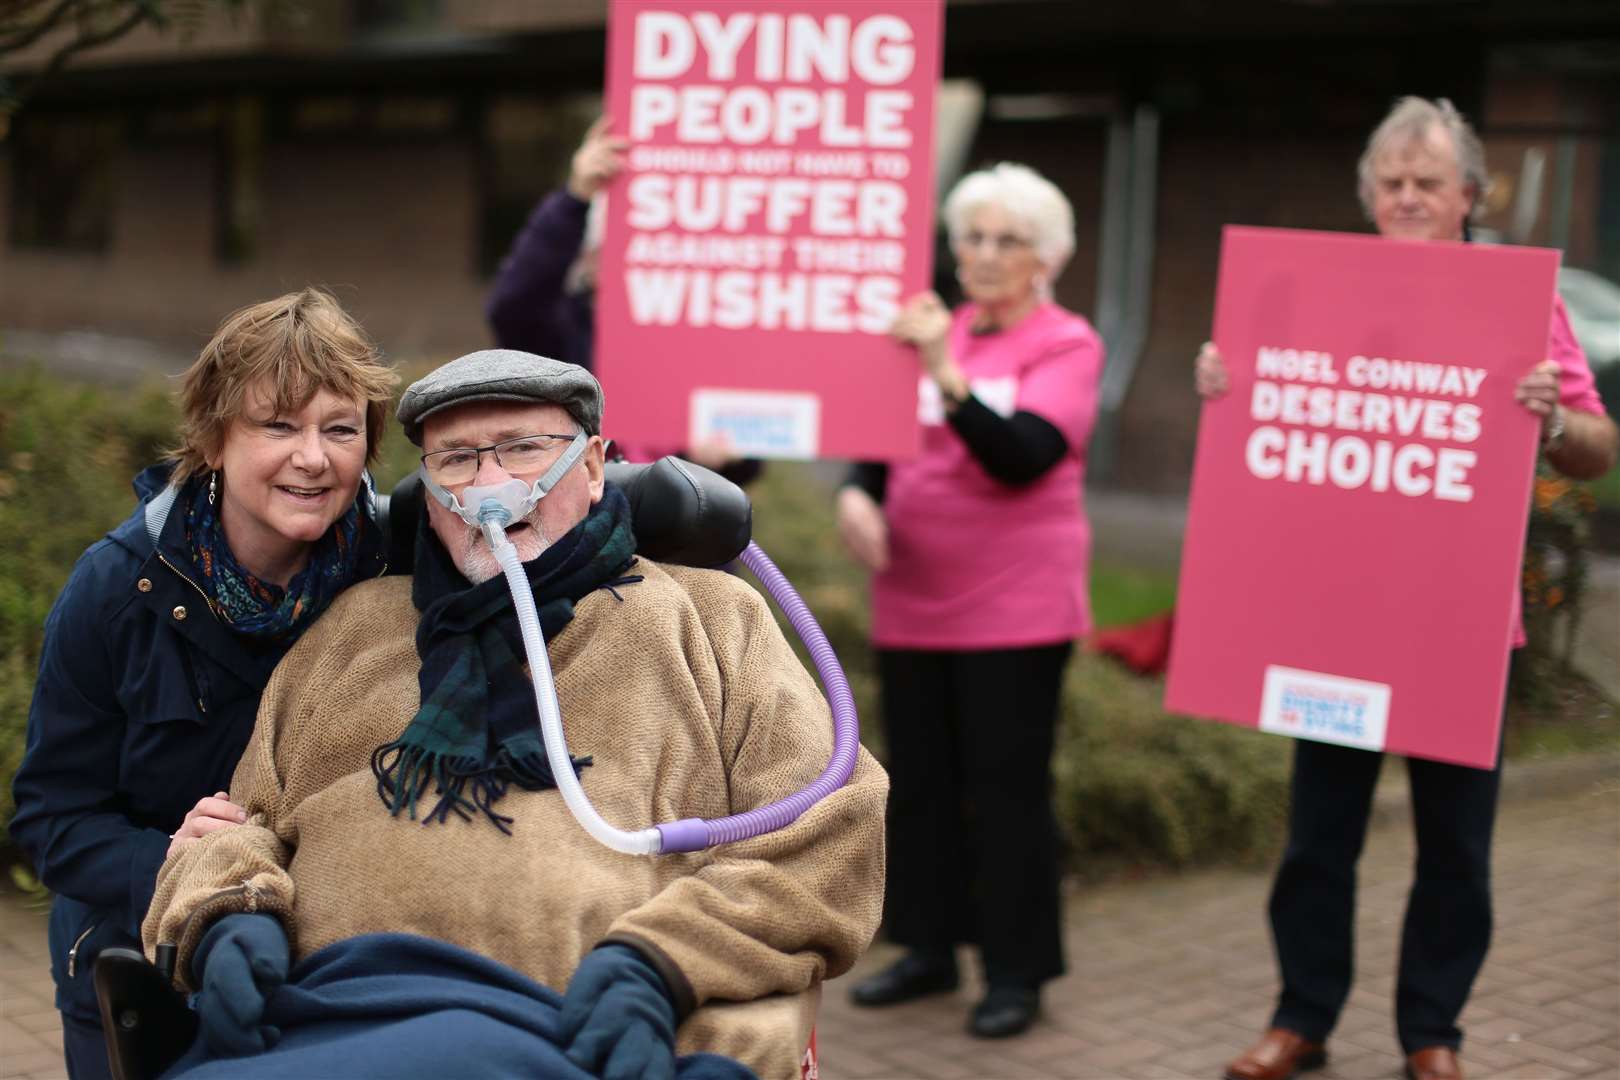 Terminally ill Noel Conway, pictured in 2018, has been campaigning for years to receive an assisted death in the UK (Aaron Chown/PA)